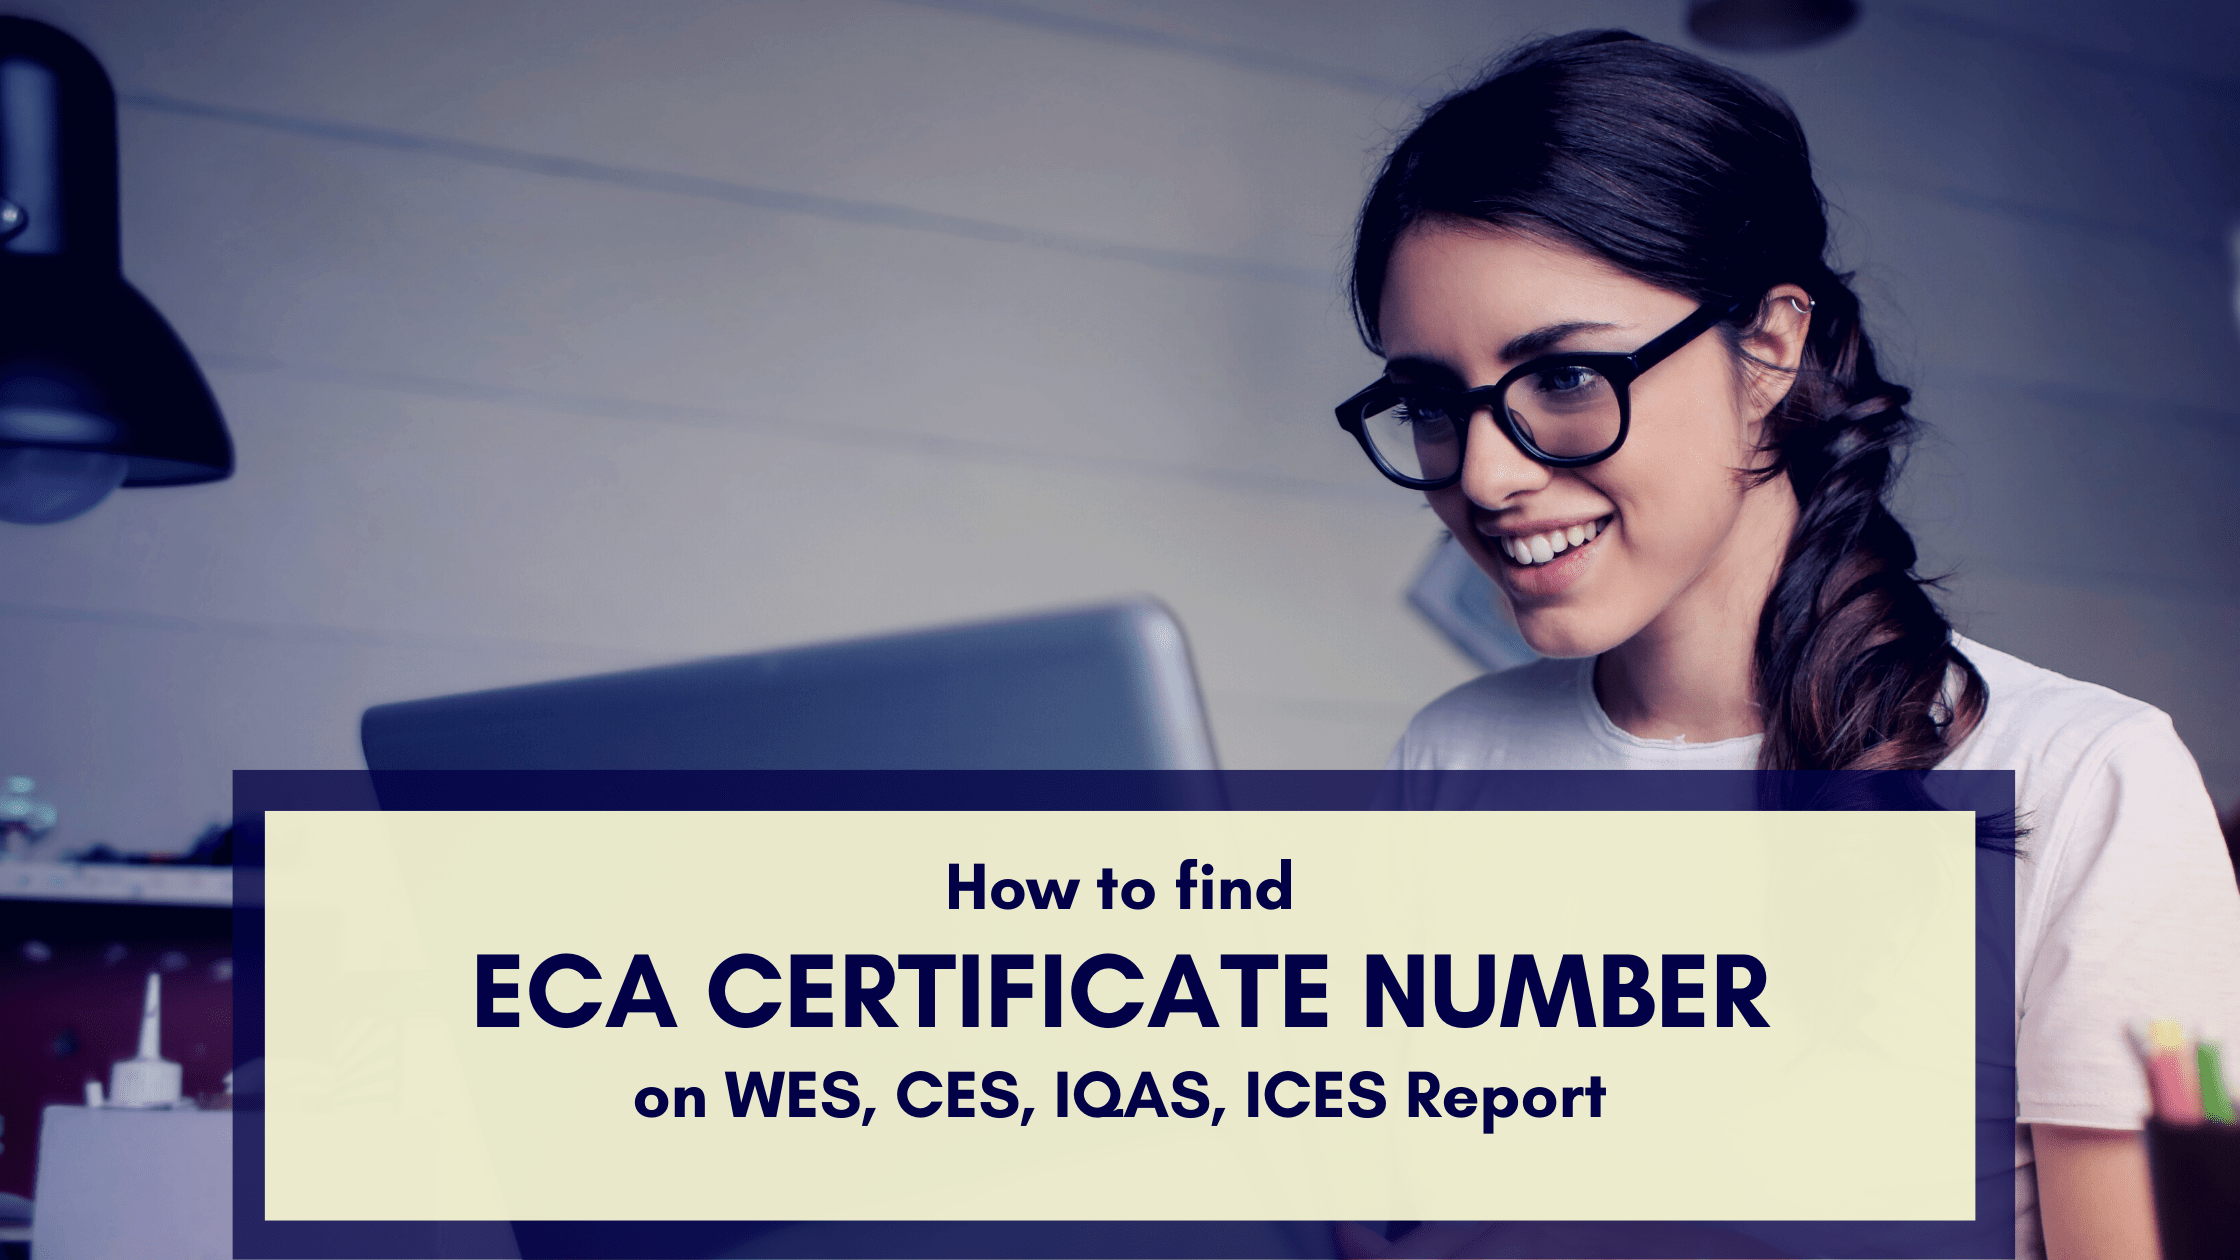 How to Find ECA Certificate Number on WES, CES, IQAS, ICES Report?